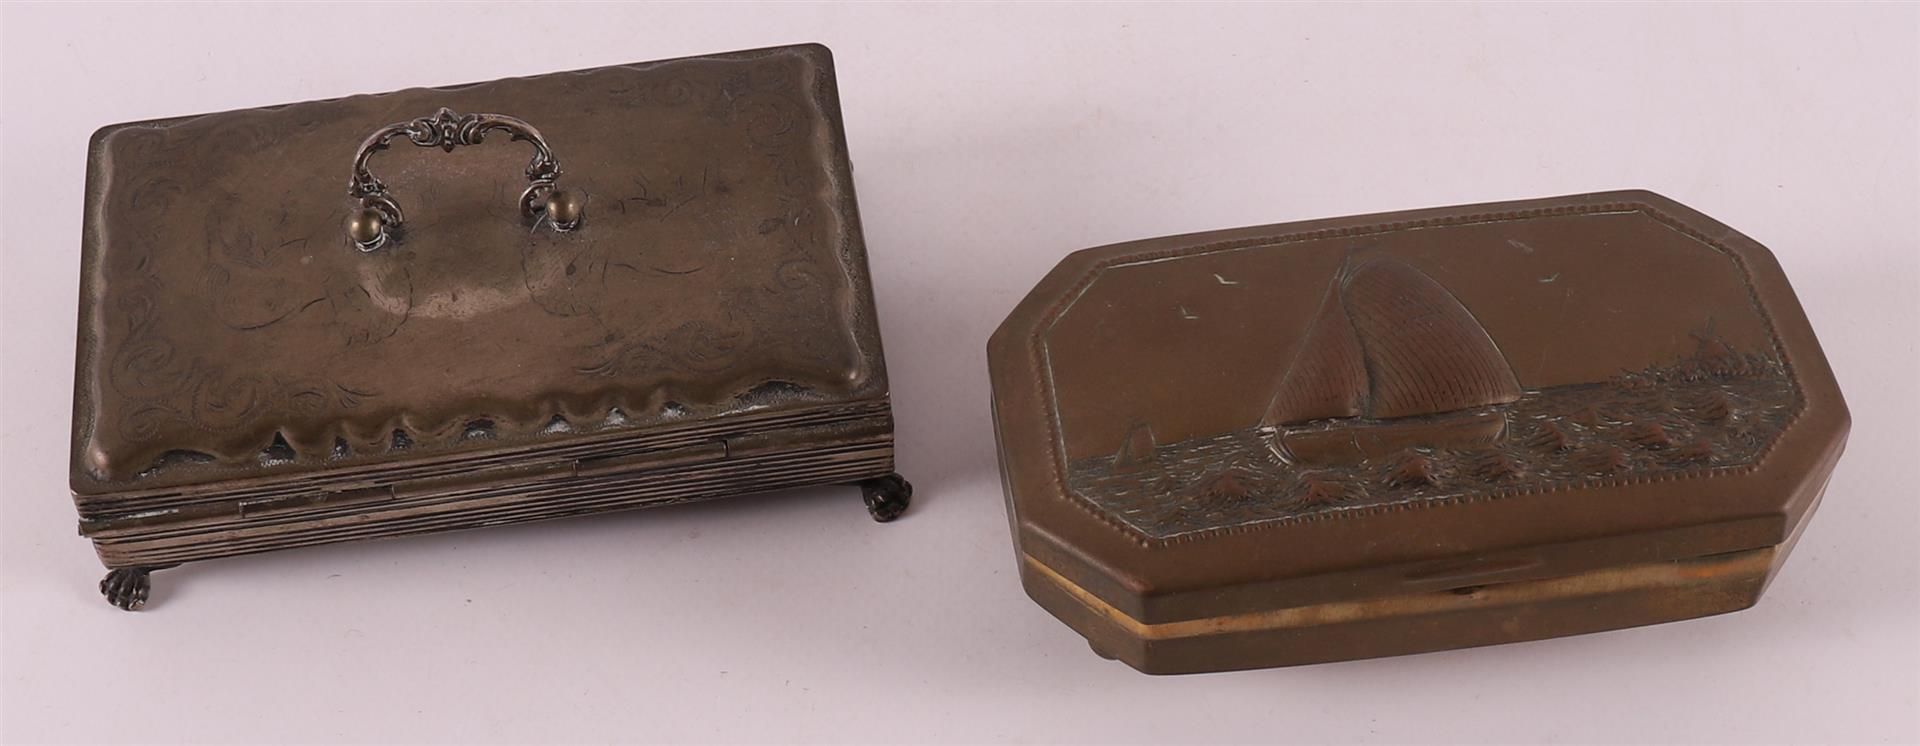 A 2nd grade 835/1000 silver spoon box, early 20th century.